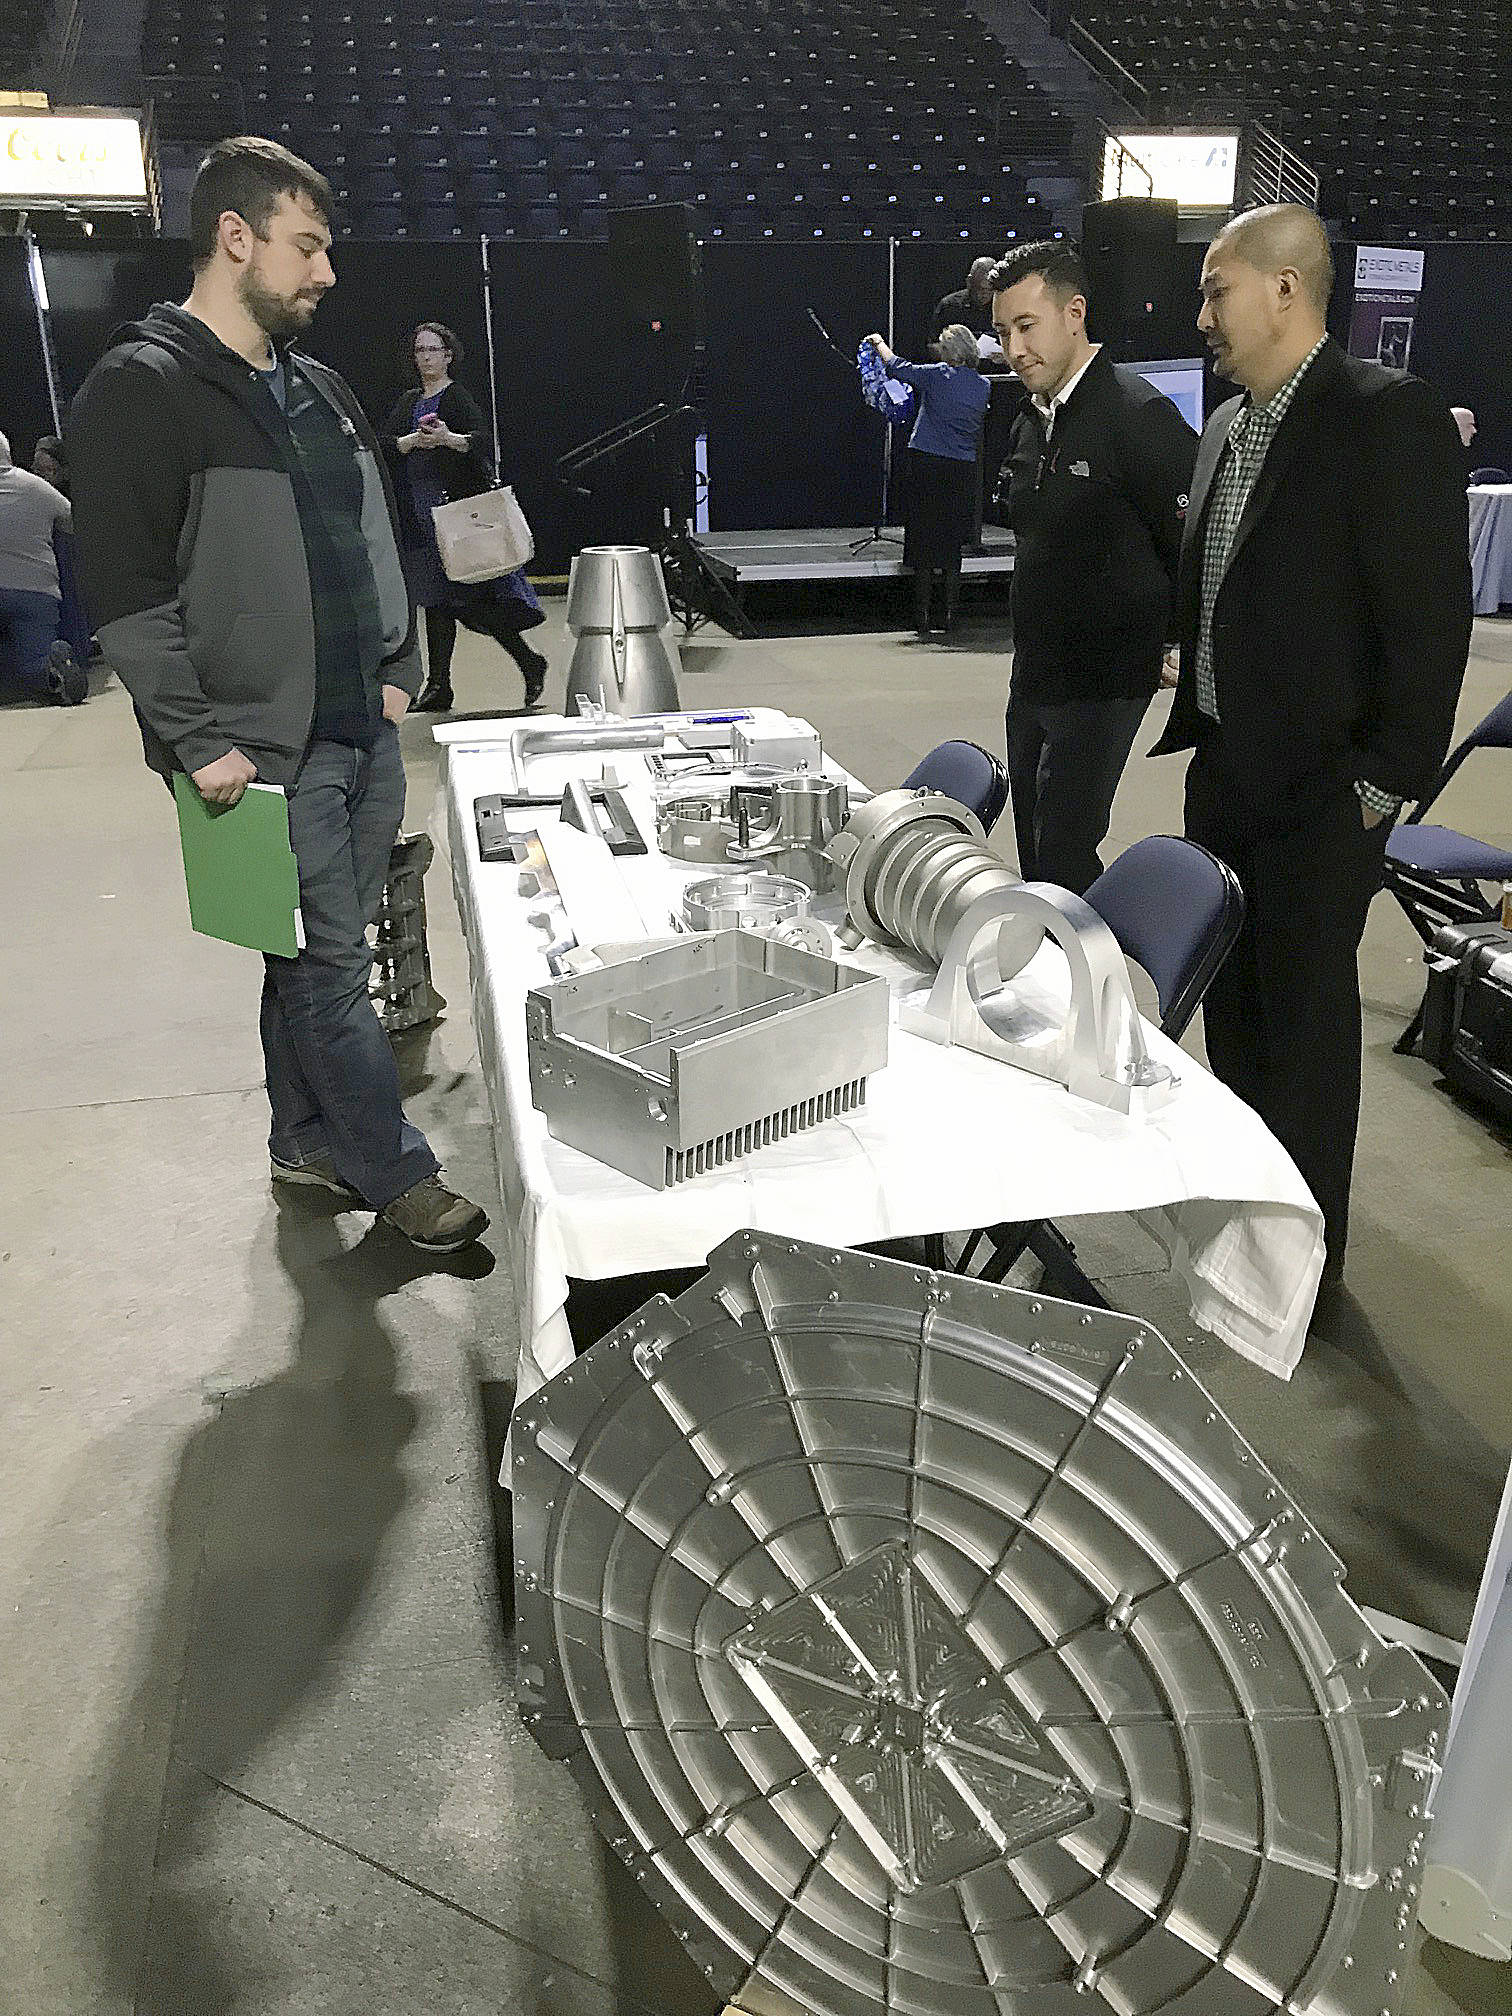 Representatives from Duvall-based Pentz Cast Solutions – a precision aluminum casting foundry – talks to a interested job seeker during the fair. MARK KLAAS, Auburn Reporter